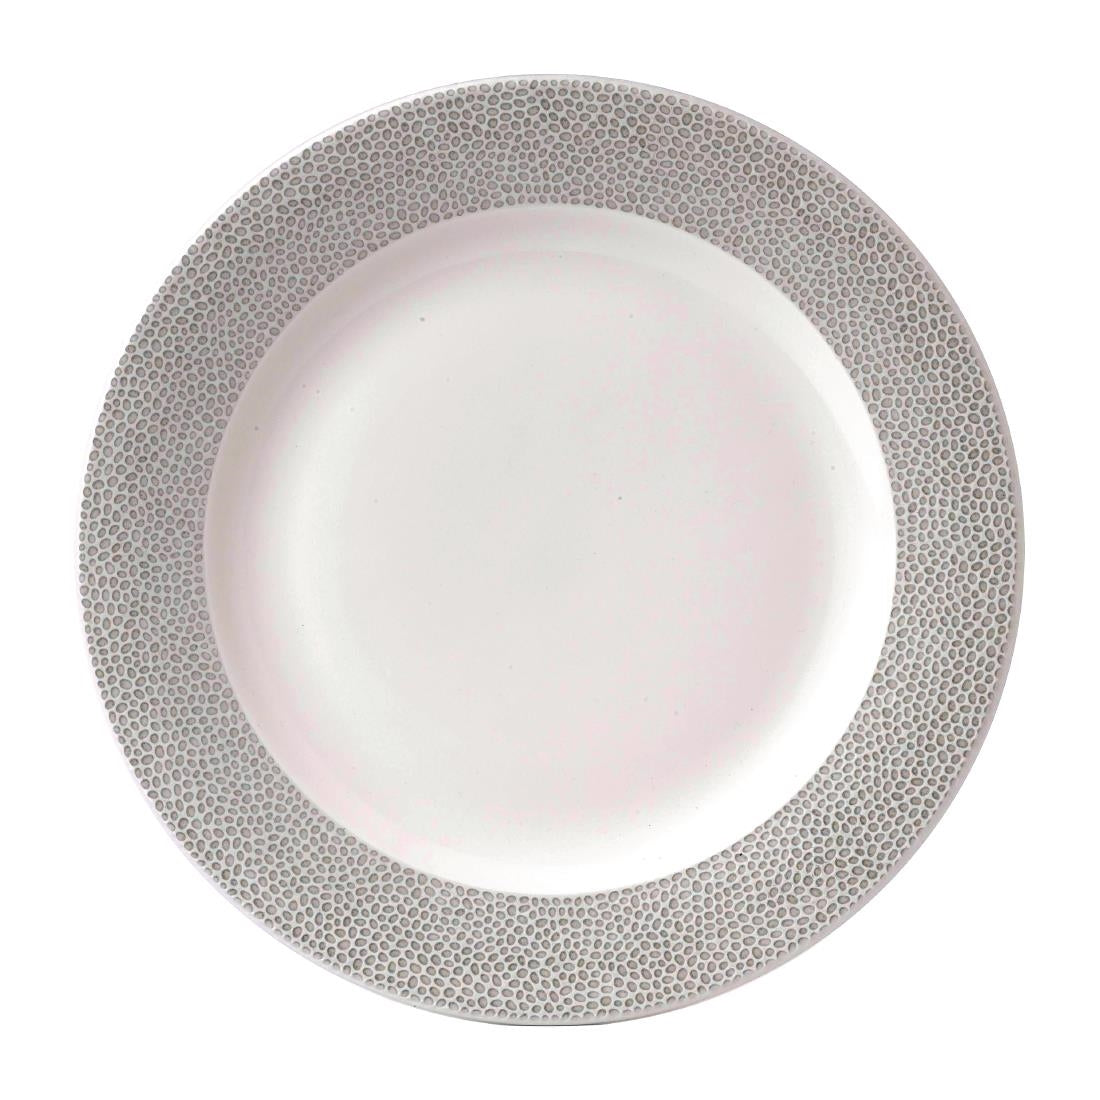 FD836 Churchill Isla Spinwash Profile Wide Rim Plates Shale Grey 305mm (Pack of 12) JD Catering Equipment Solutions Ltd